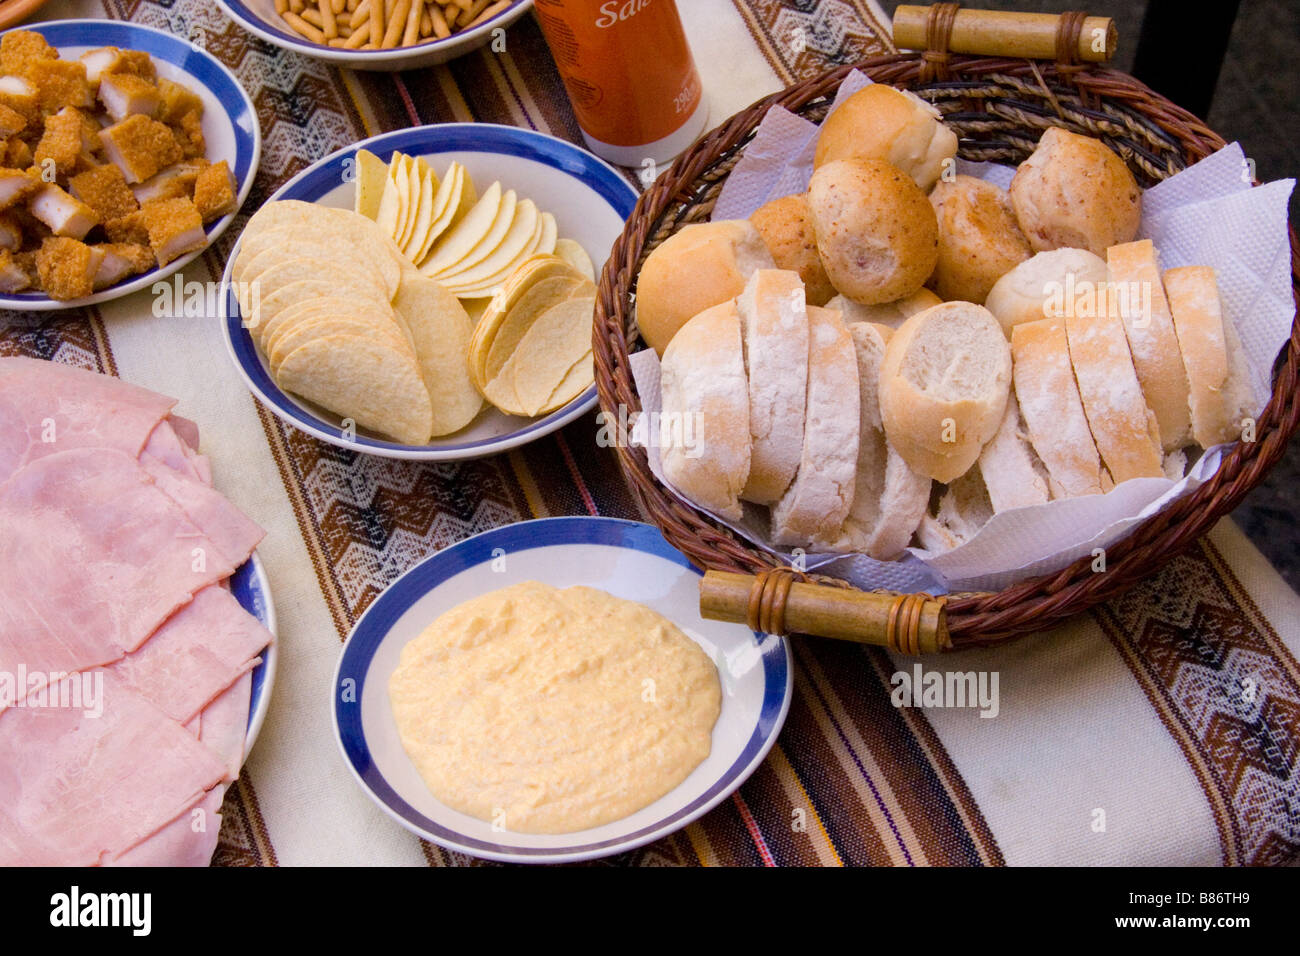 A table of typical Argentinean entrees: ham, bread, a bread basket and dips. Stock Photo